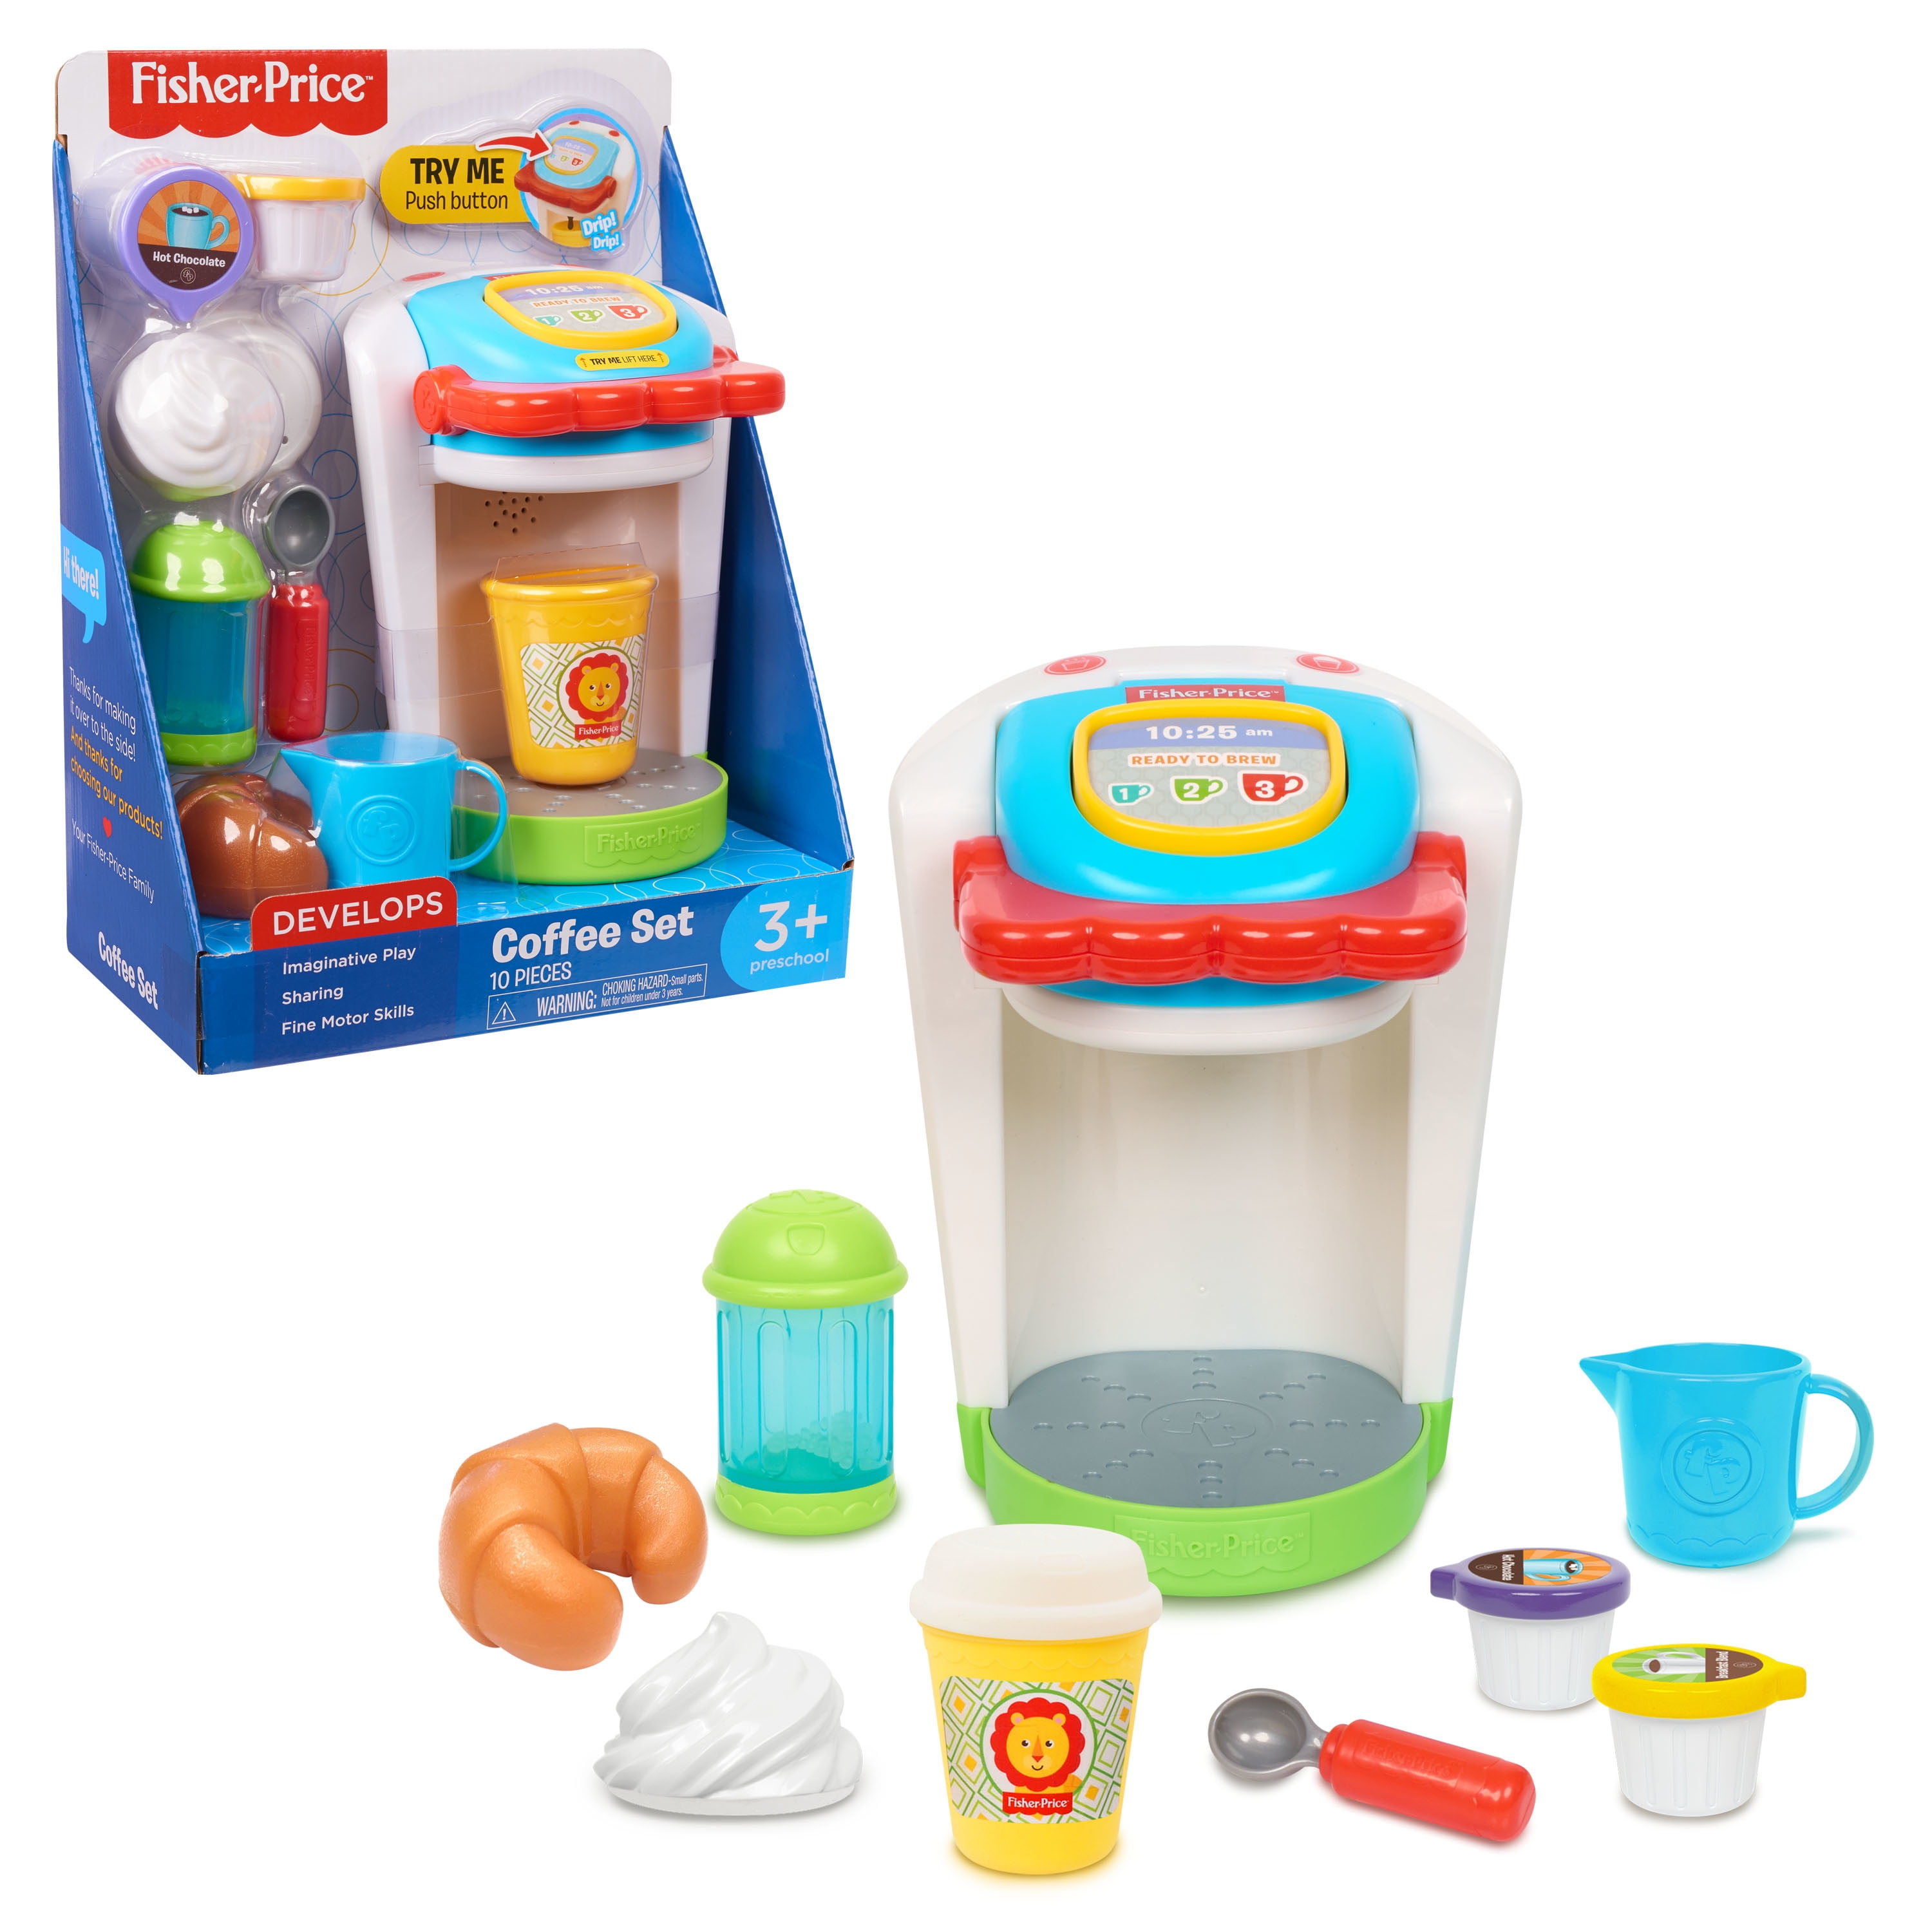 Nothing But Fun Toys My First Coffee Maker Playset Designed for Children  Ages 3+ Years Teal 10.35 x 5.63 x 9.57